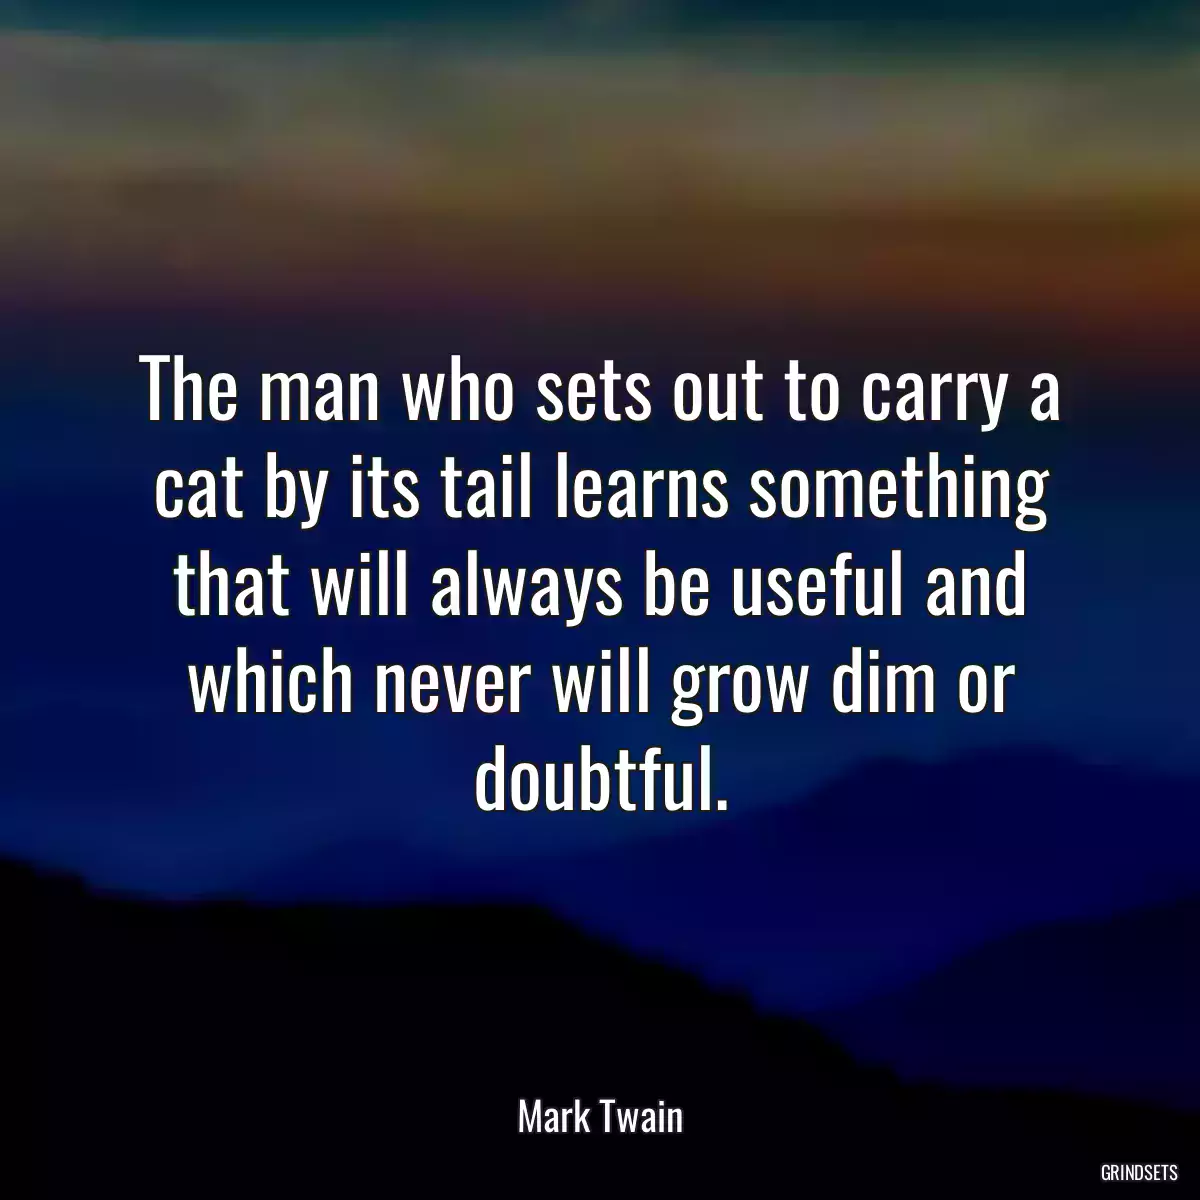 The man who sets out to carry a cat by its tail learns something that will always be useful and which never will grow dim or doubtful.